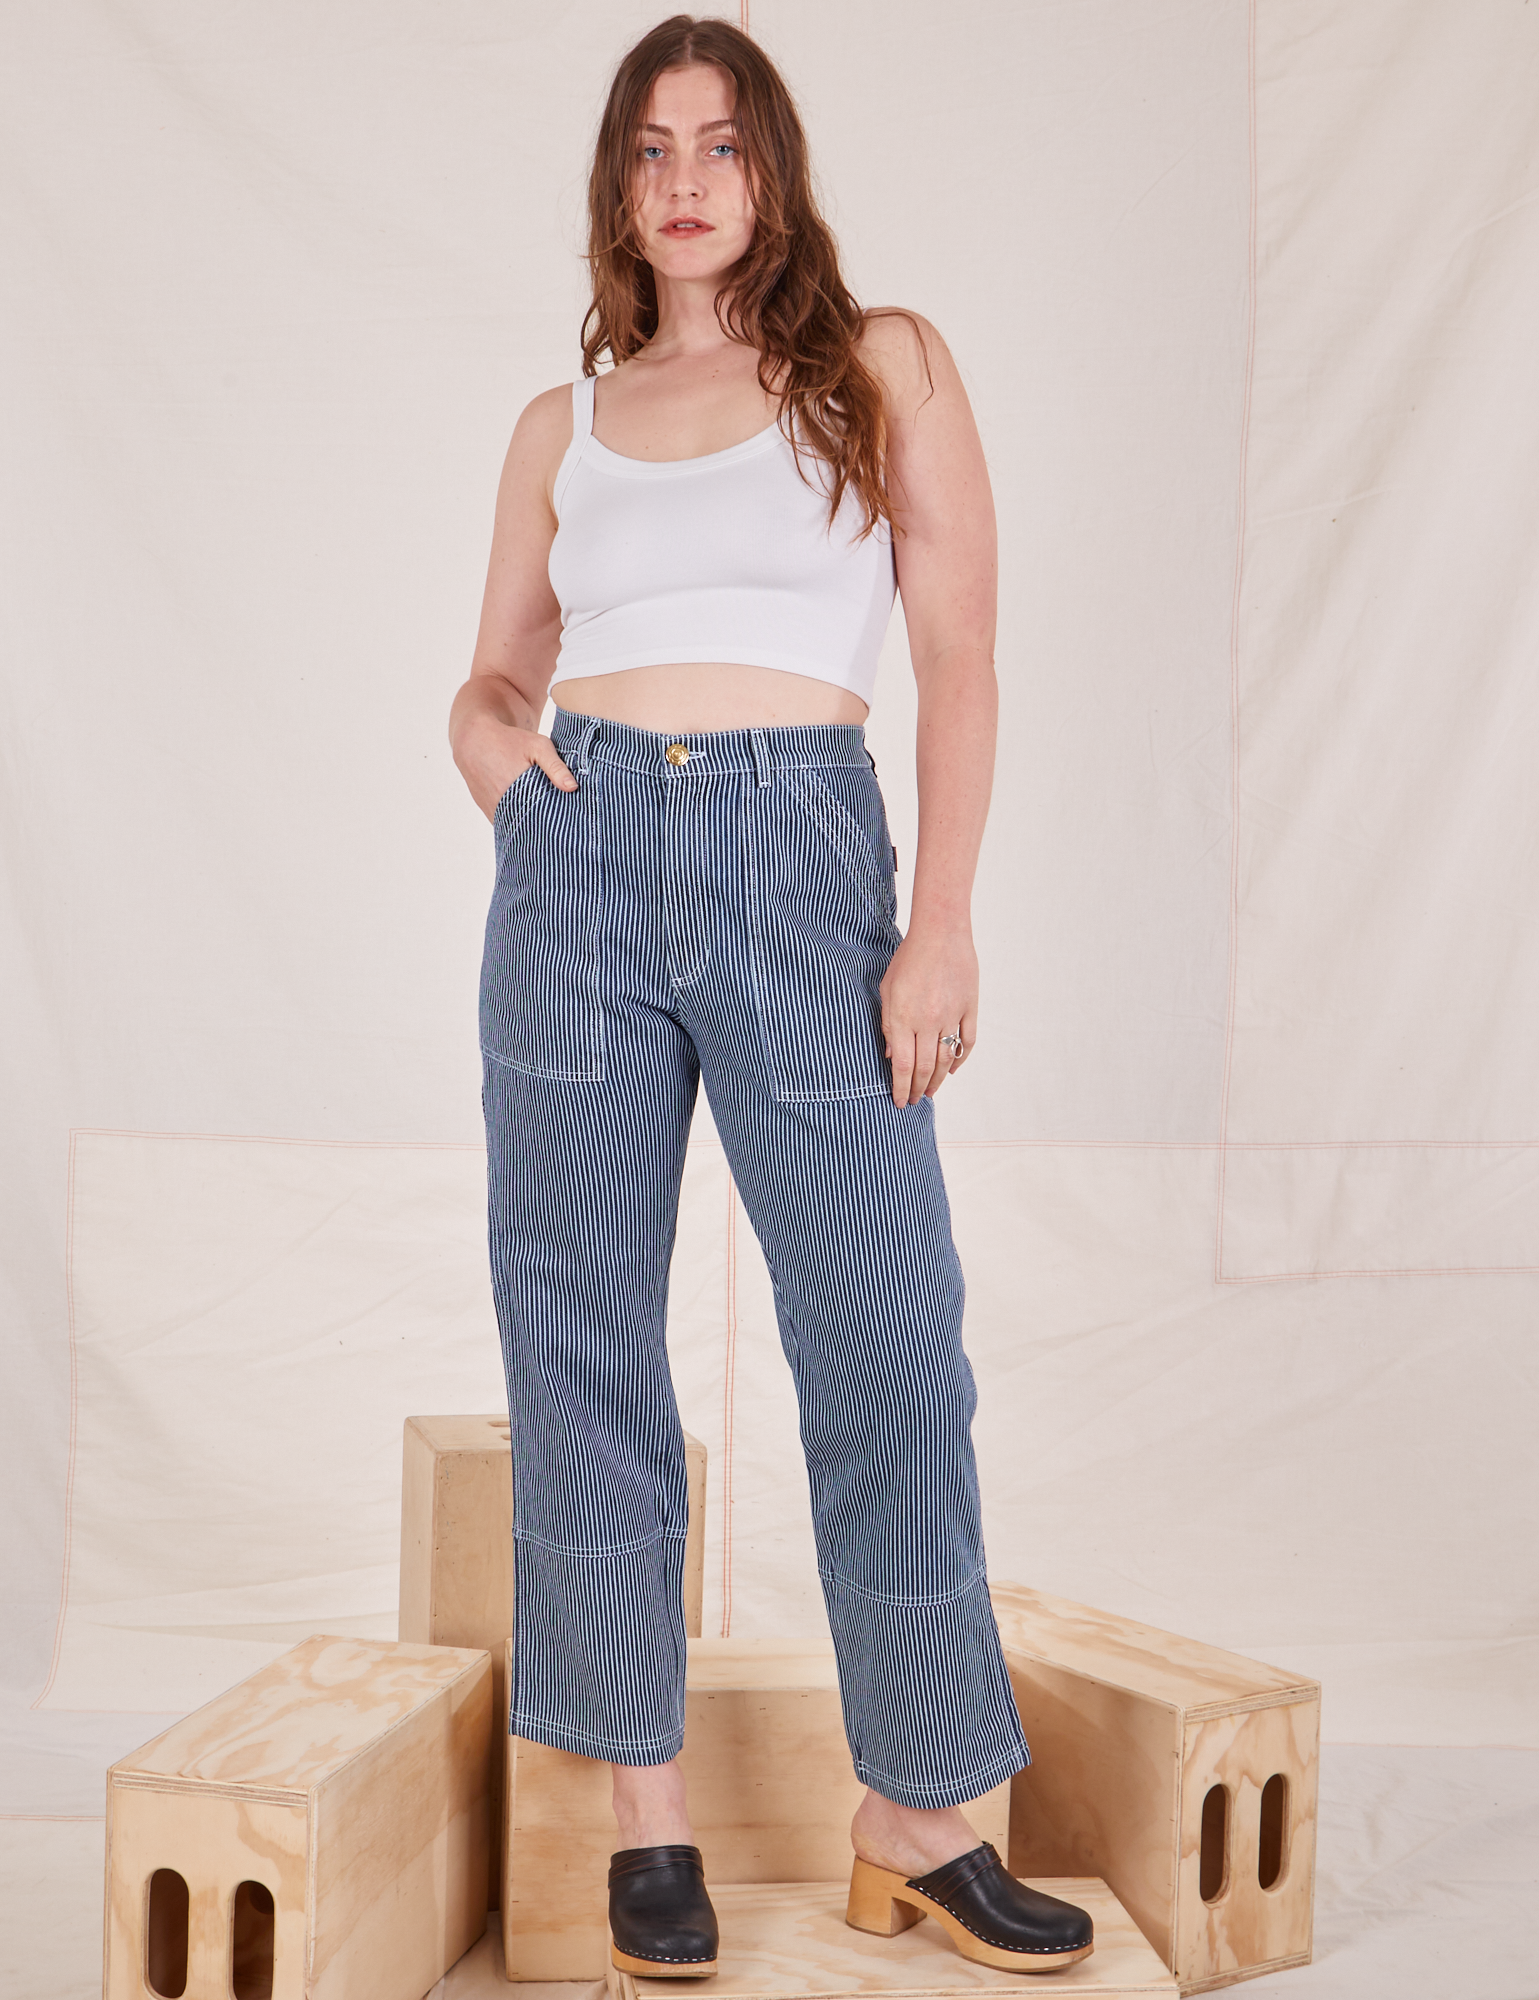 Allison is 5&#39;10&quot; and wearing S Carpenter Jeans in Railroad Stripes paired with vintage off-white Cami